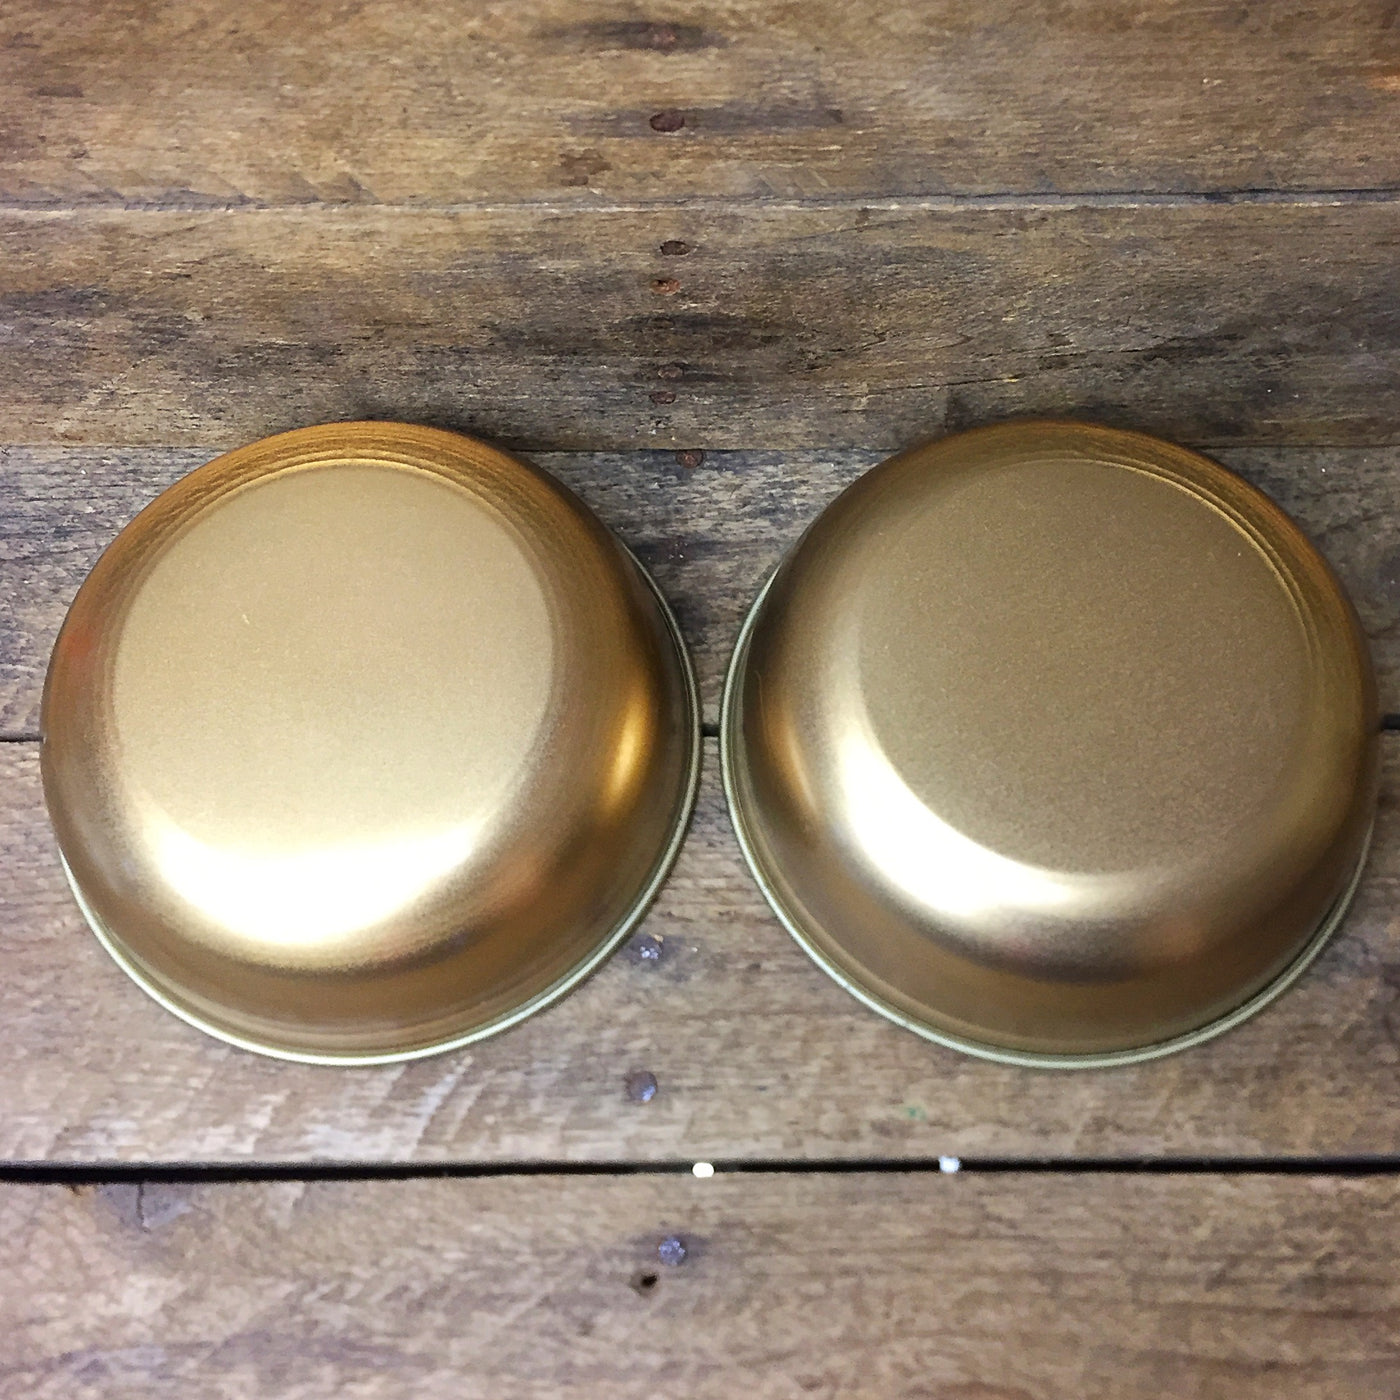 Set of Two Brass Colored Design Bowls 5" diameter